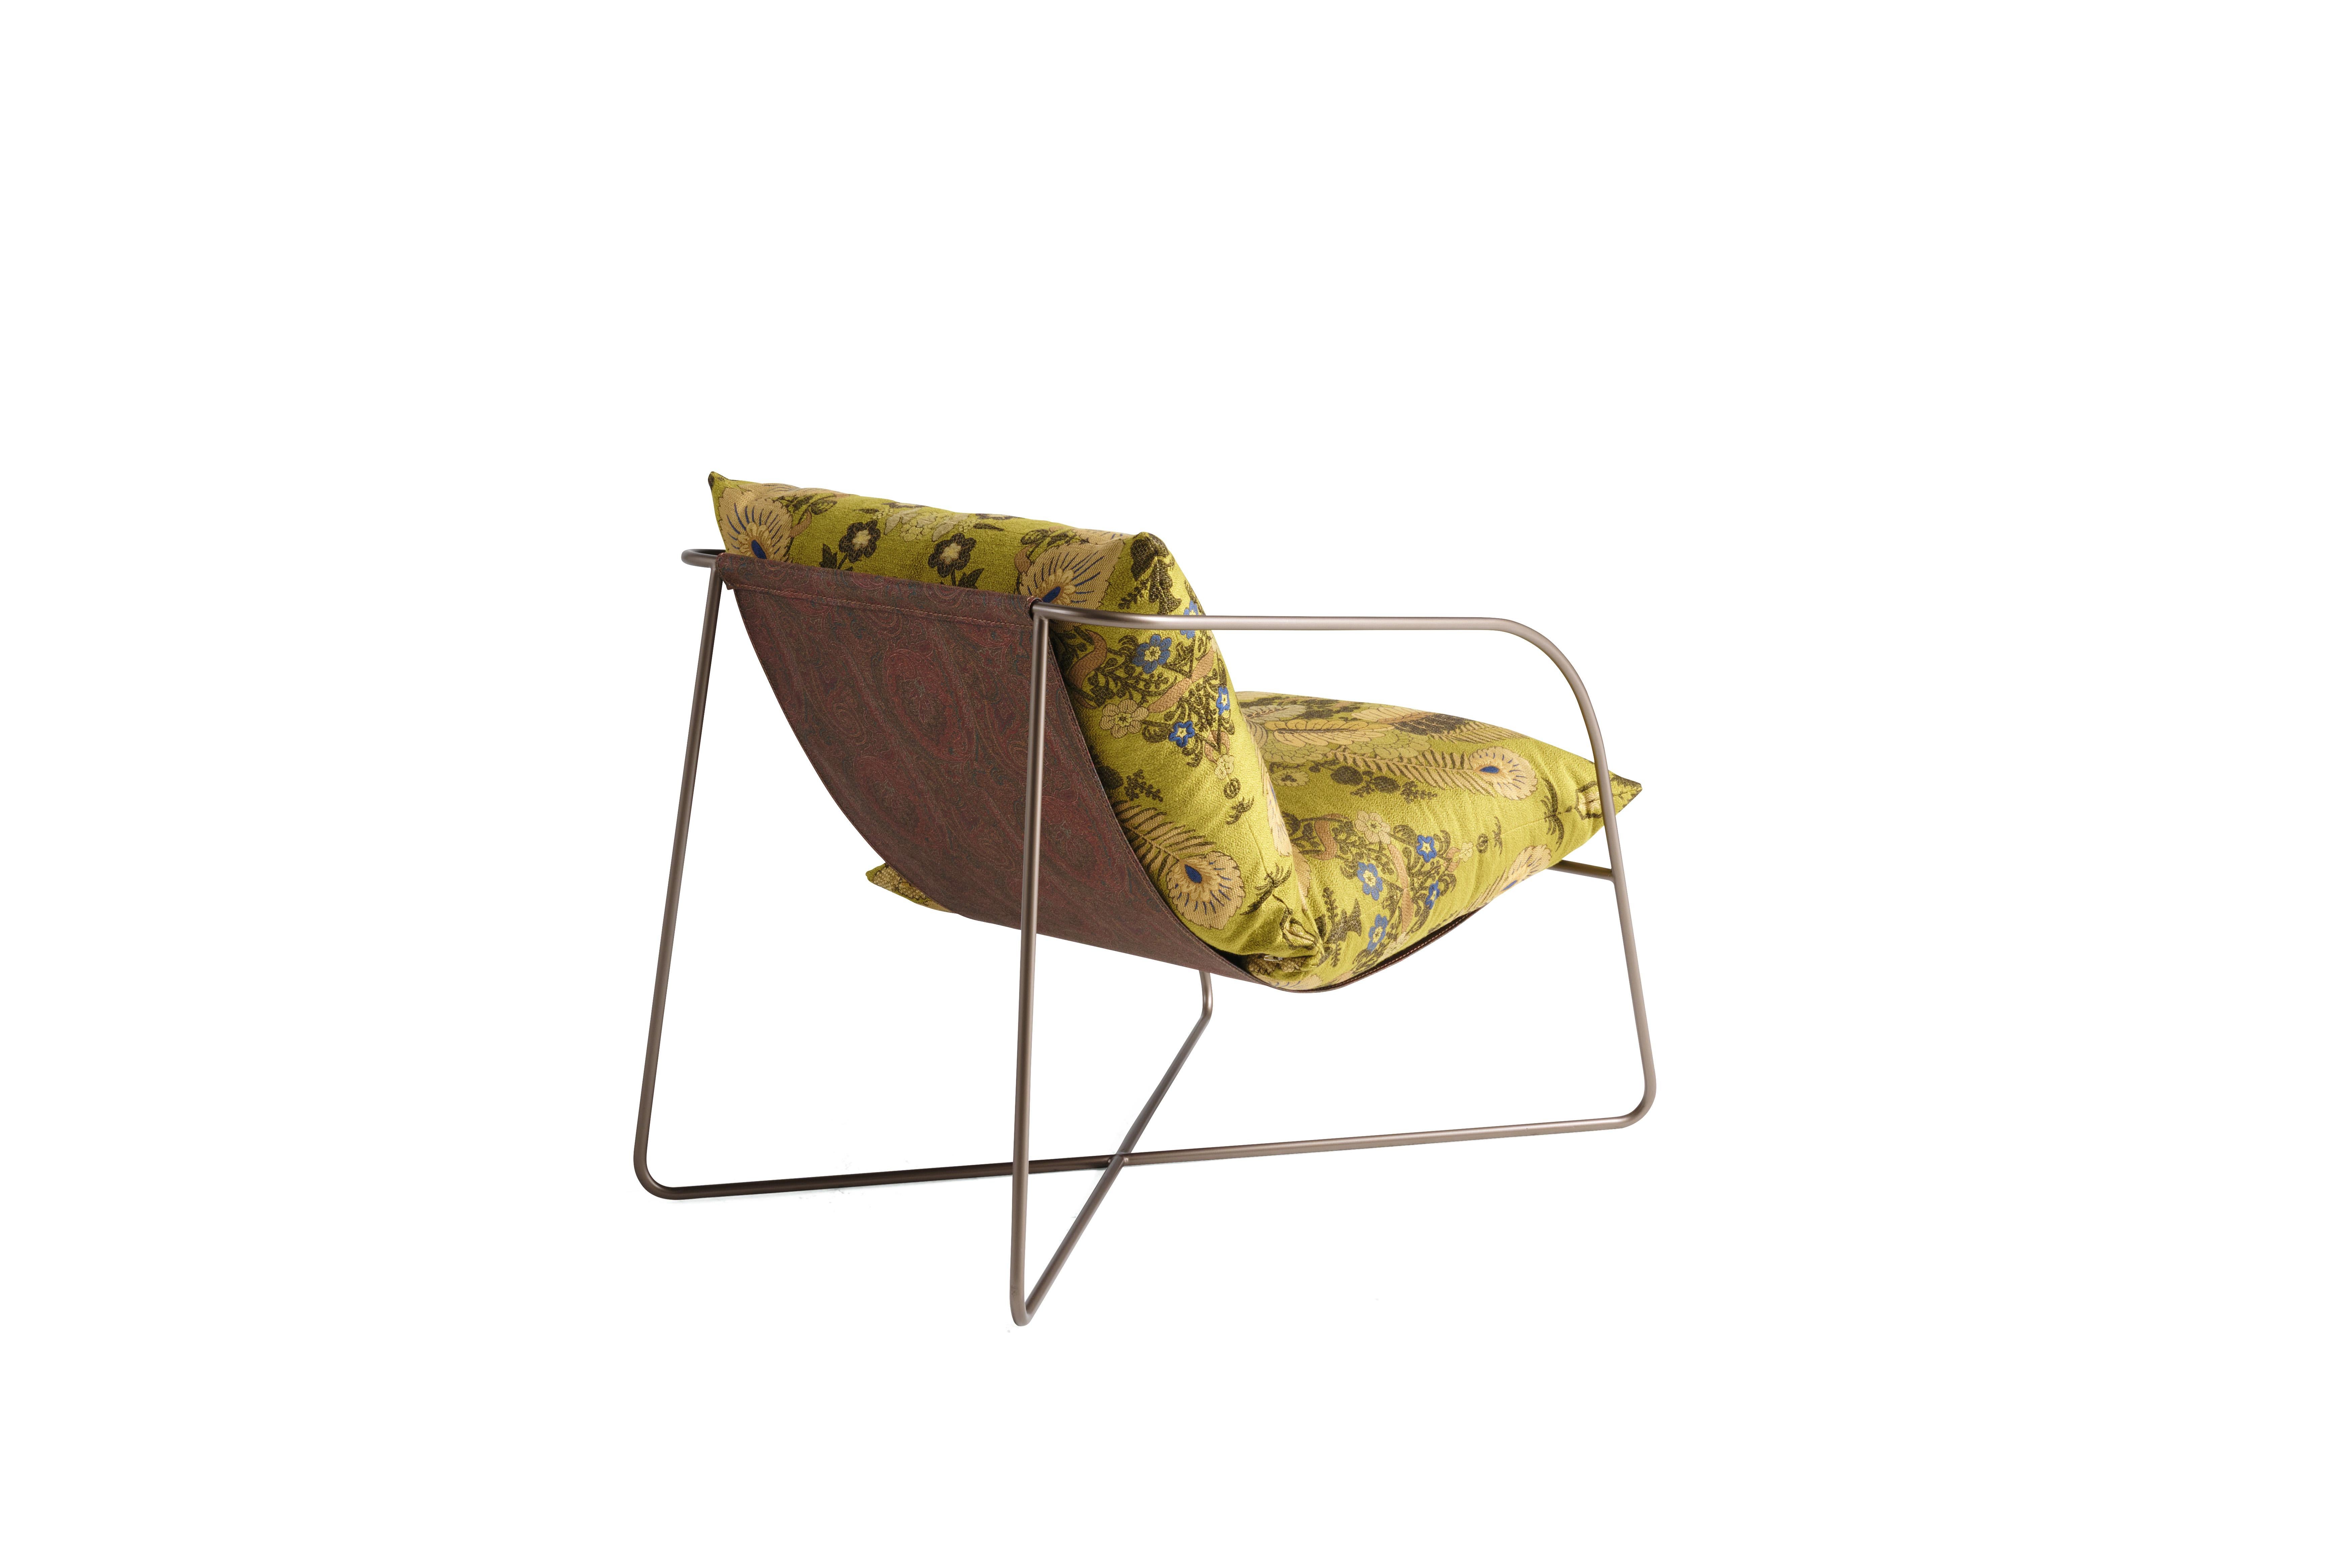 Modern 21st Century Levity Armchair in Green Jacquard Fabric by Etro Home Interiors For Sale